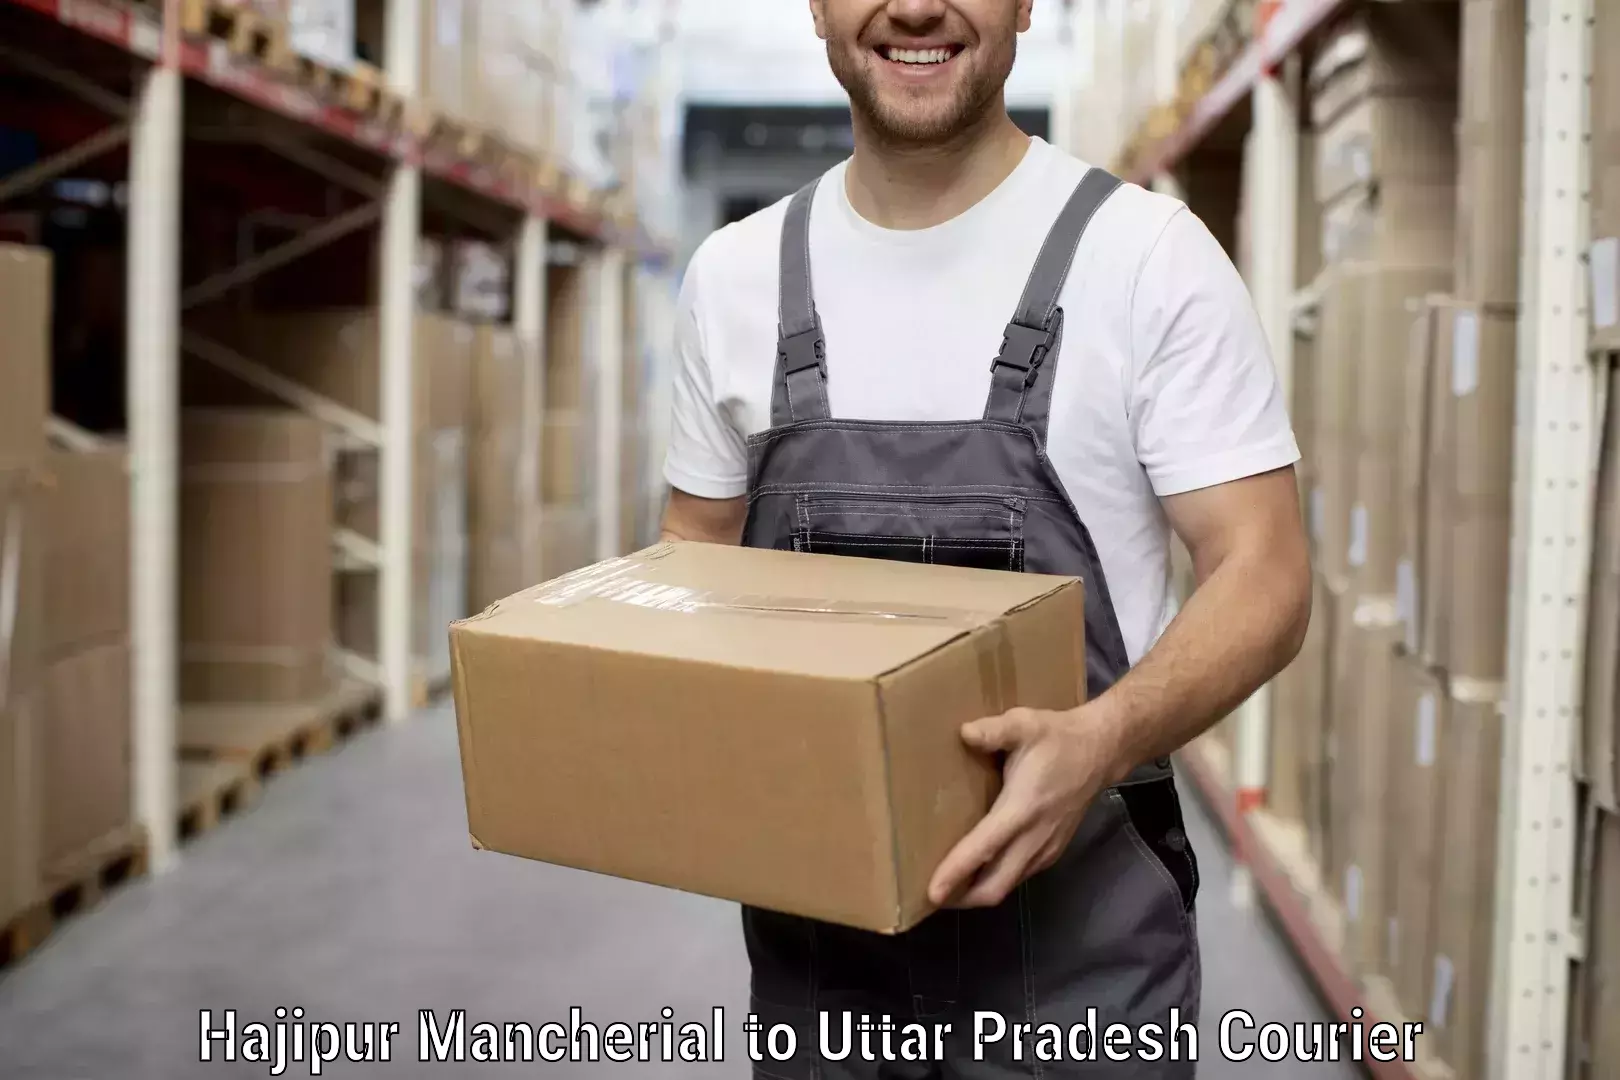 Moving and packing experts Hajipur Mancherial to Unchahar